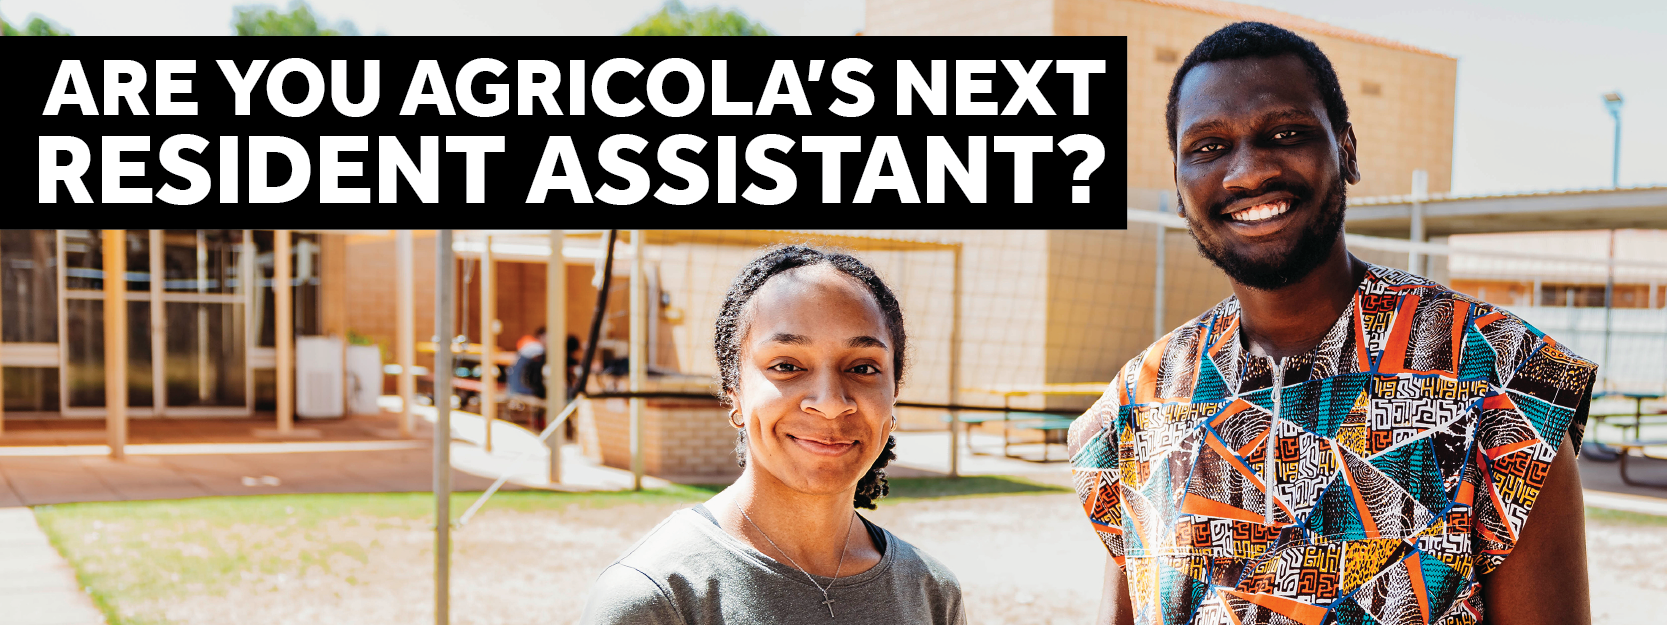 Apply now to become a Resident Assistant at Agricola